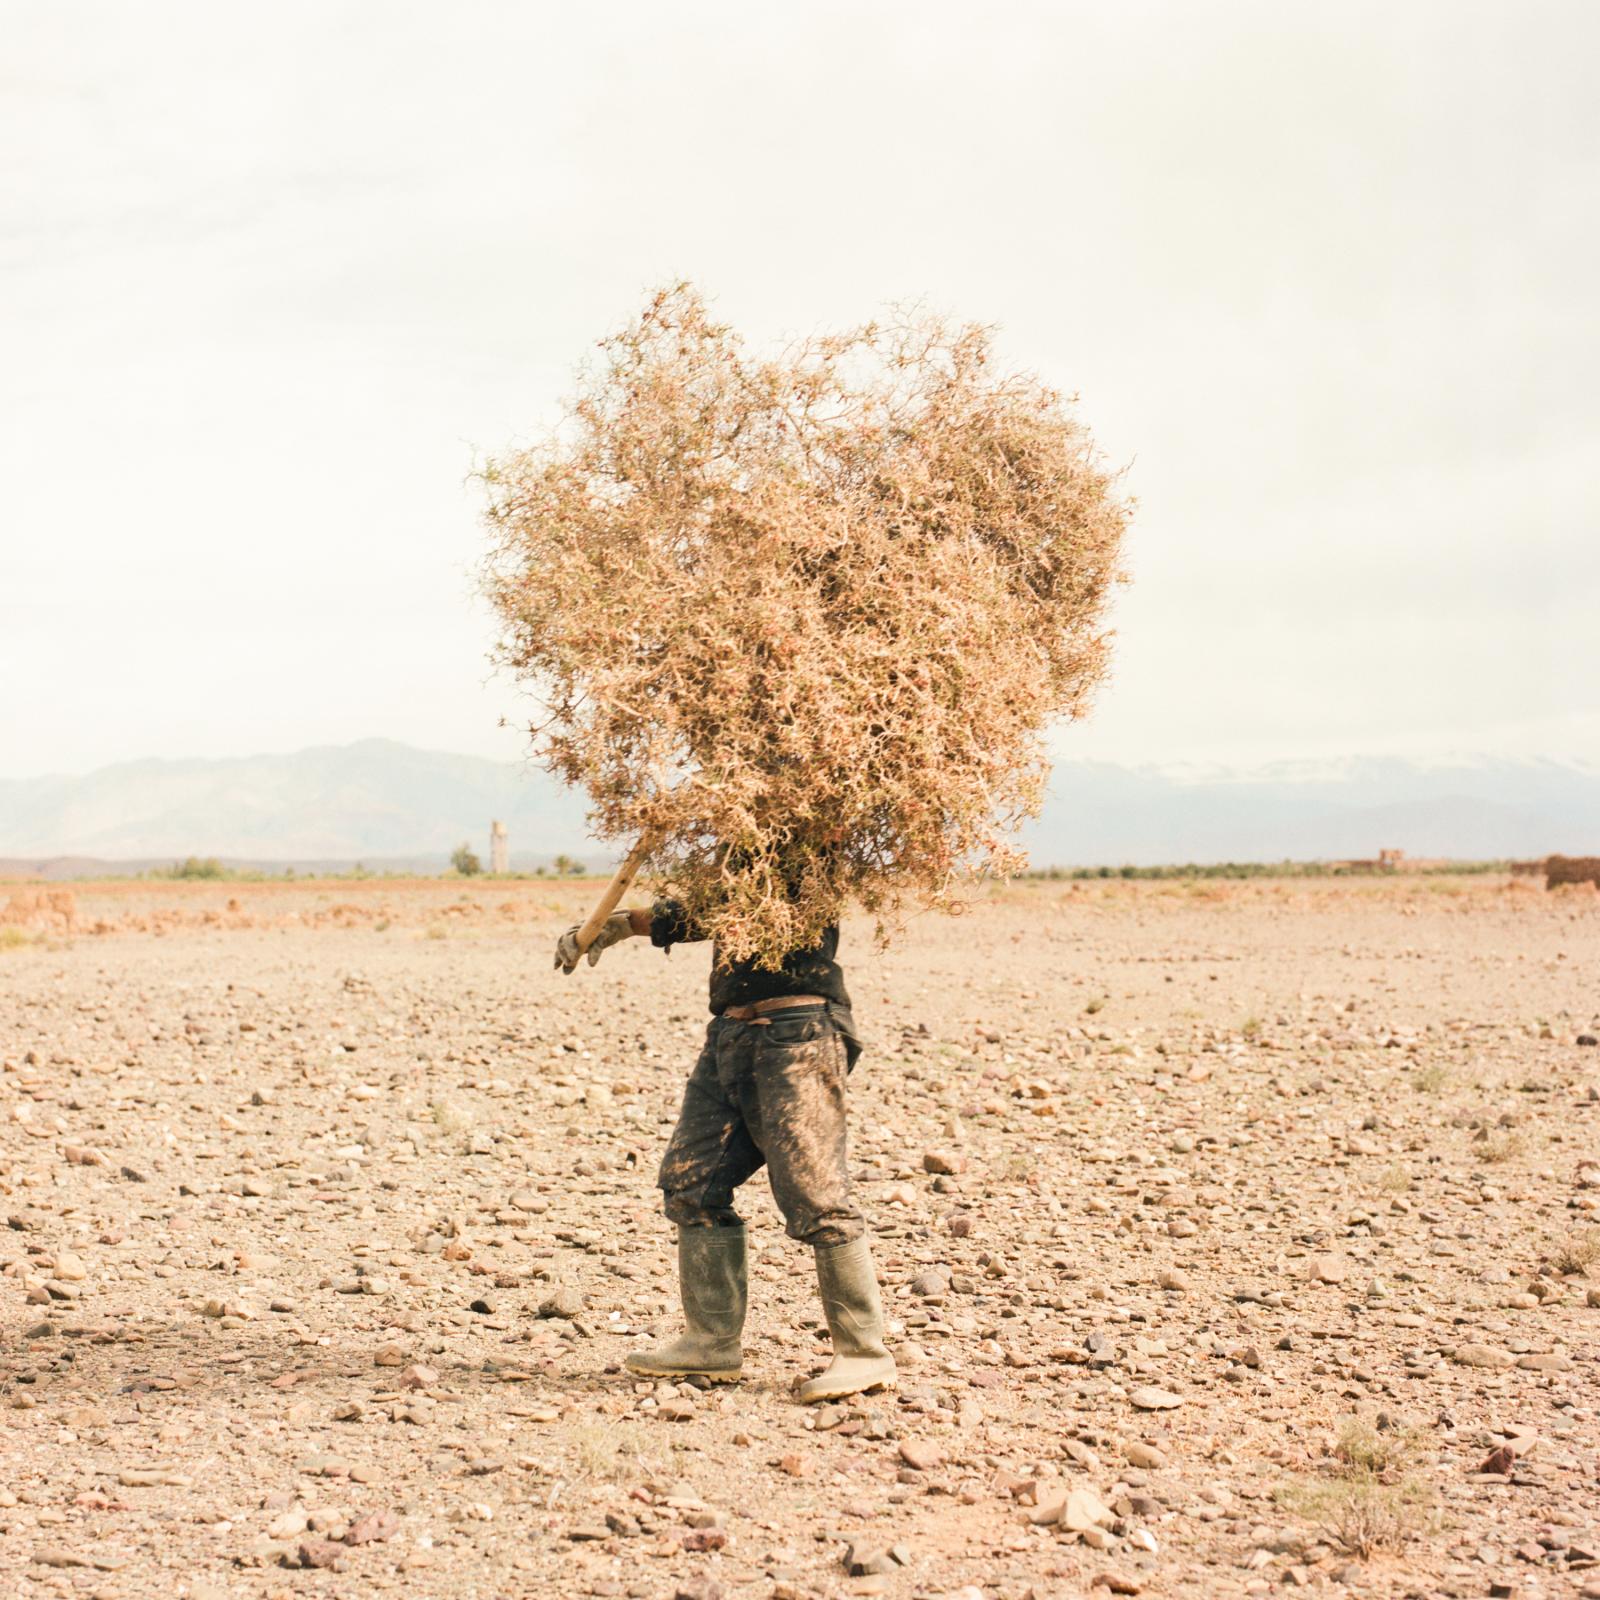 Before it's gone - ongoing - Mohammed in Skoura oasis, Morocco, in April 2022. Every...